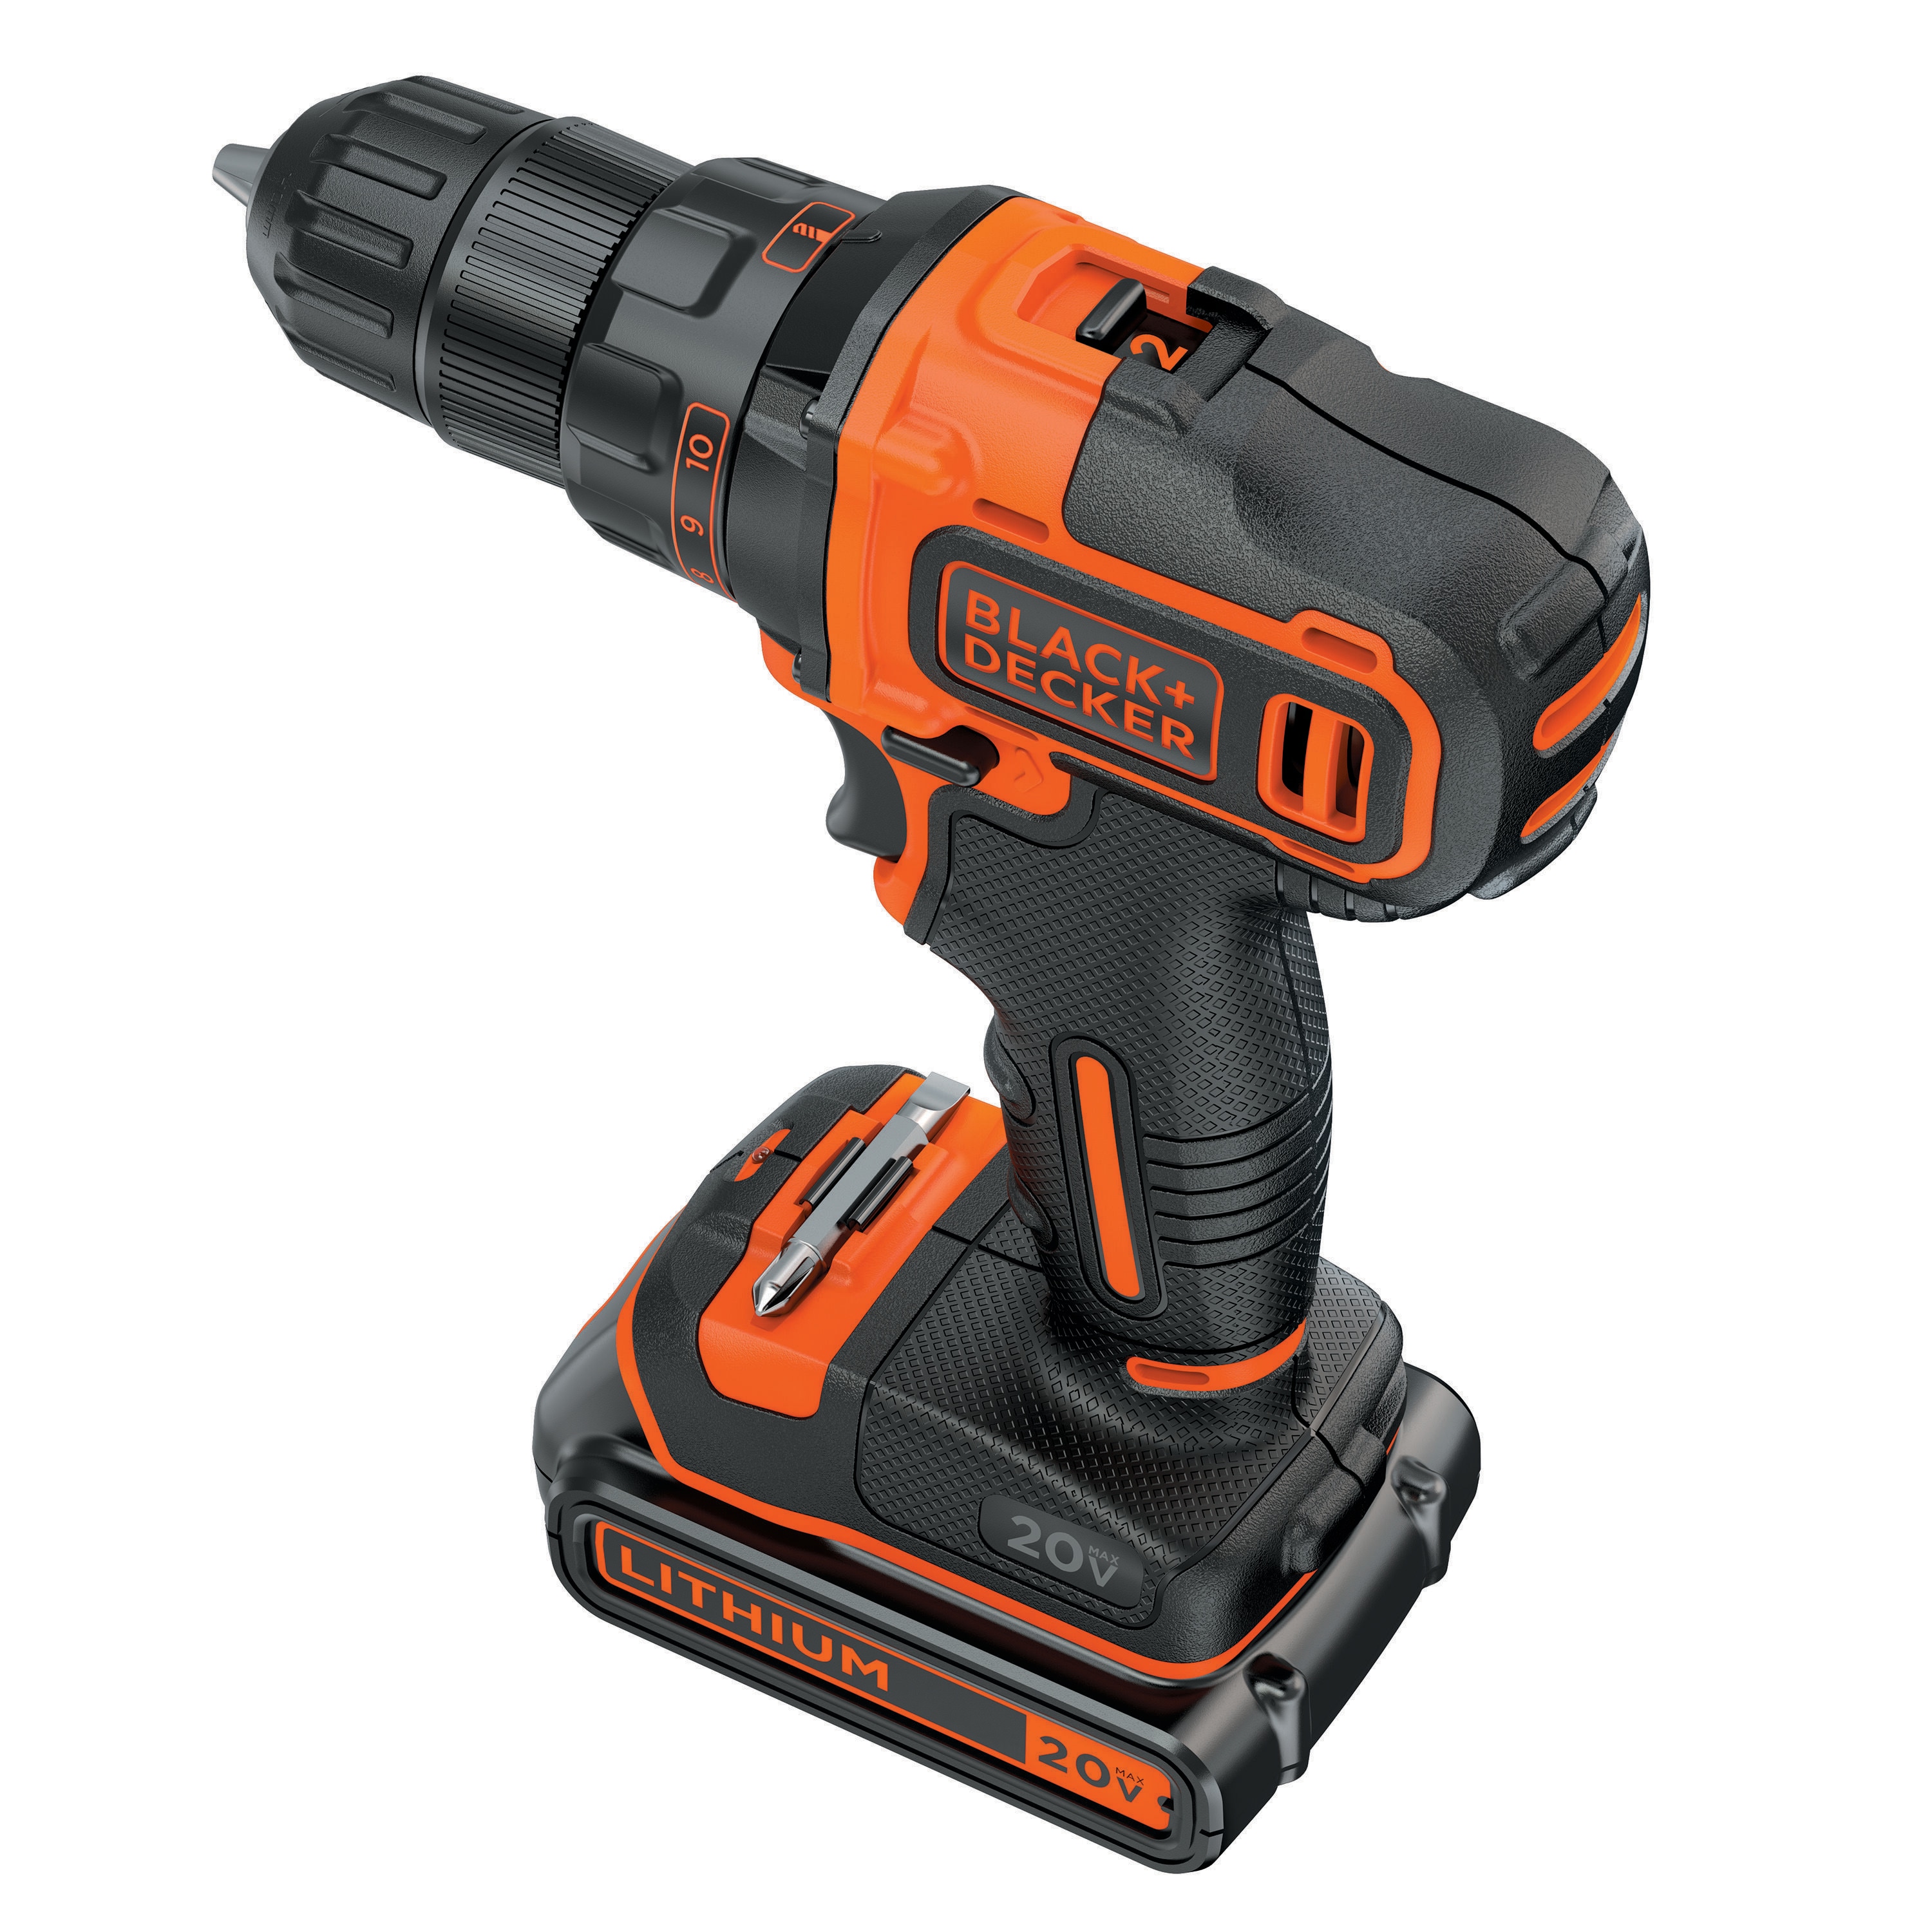 Black & Decker Toy Power Drill Battery Operated *O